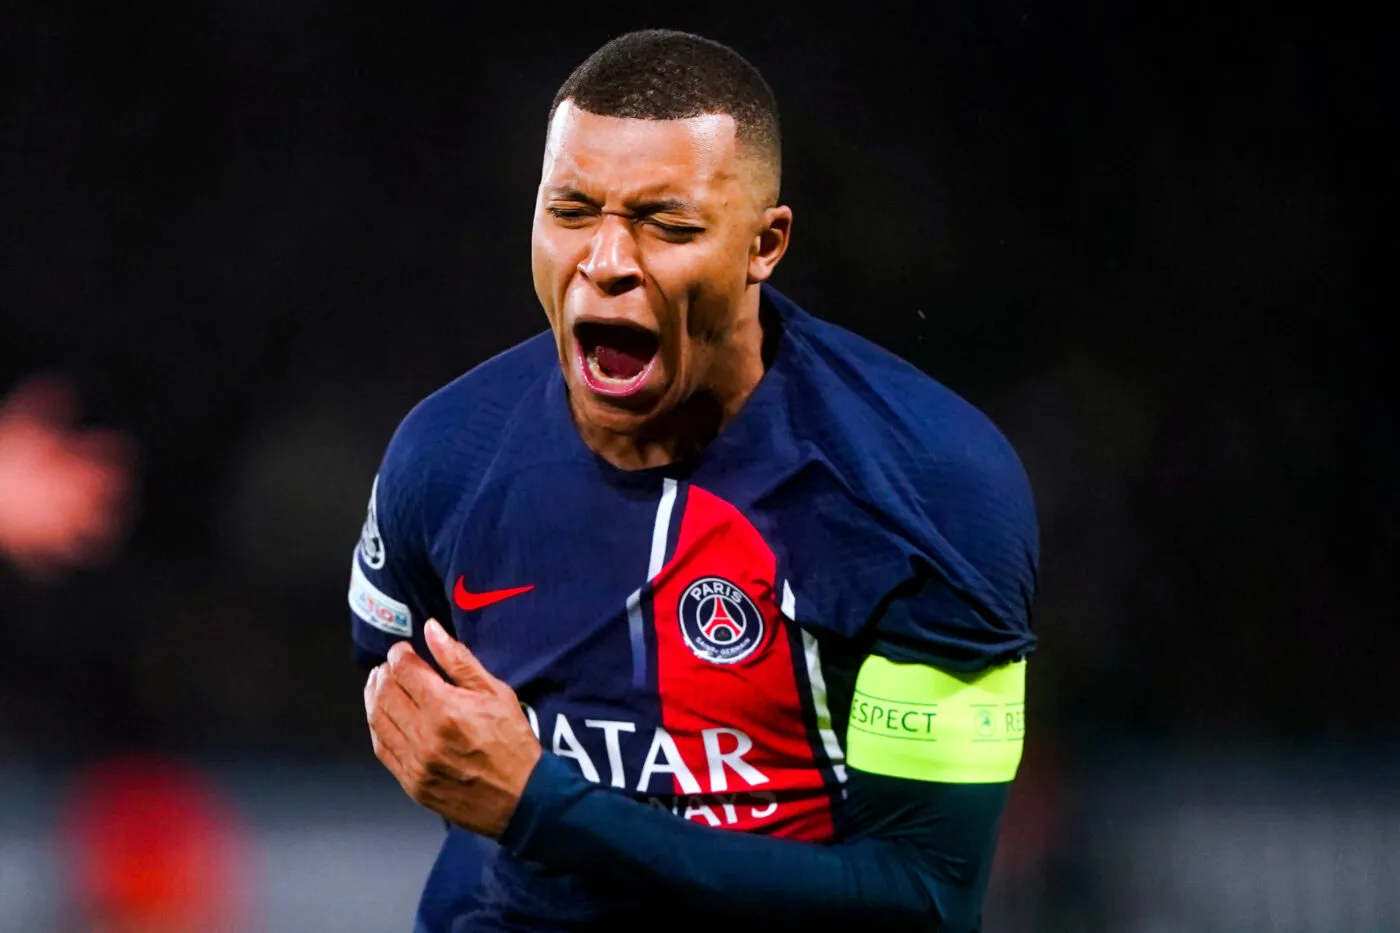 Paris Saint-Germain's Kylian Mbappe reacts during the UEFA Champions League Group F match at the Parc des Princes in Paris, France. Picture date: Tuesday November 28, 2023. - Photo by Icon sport